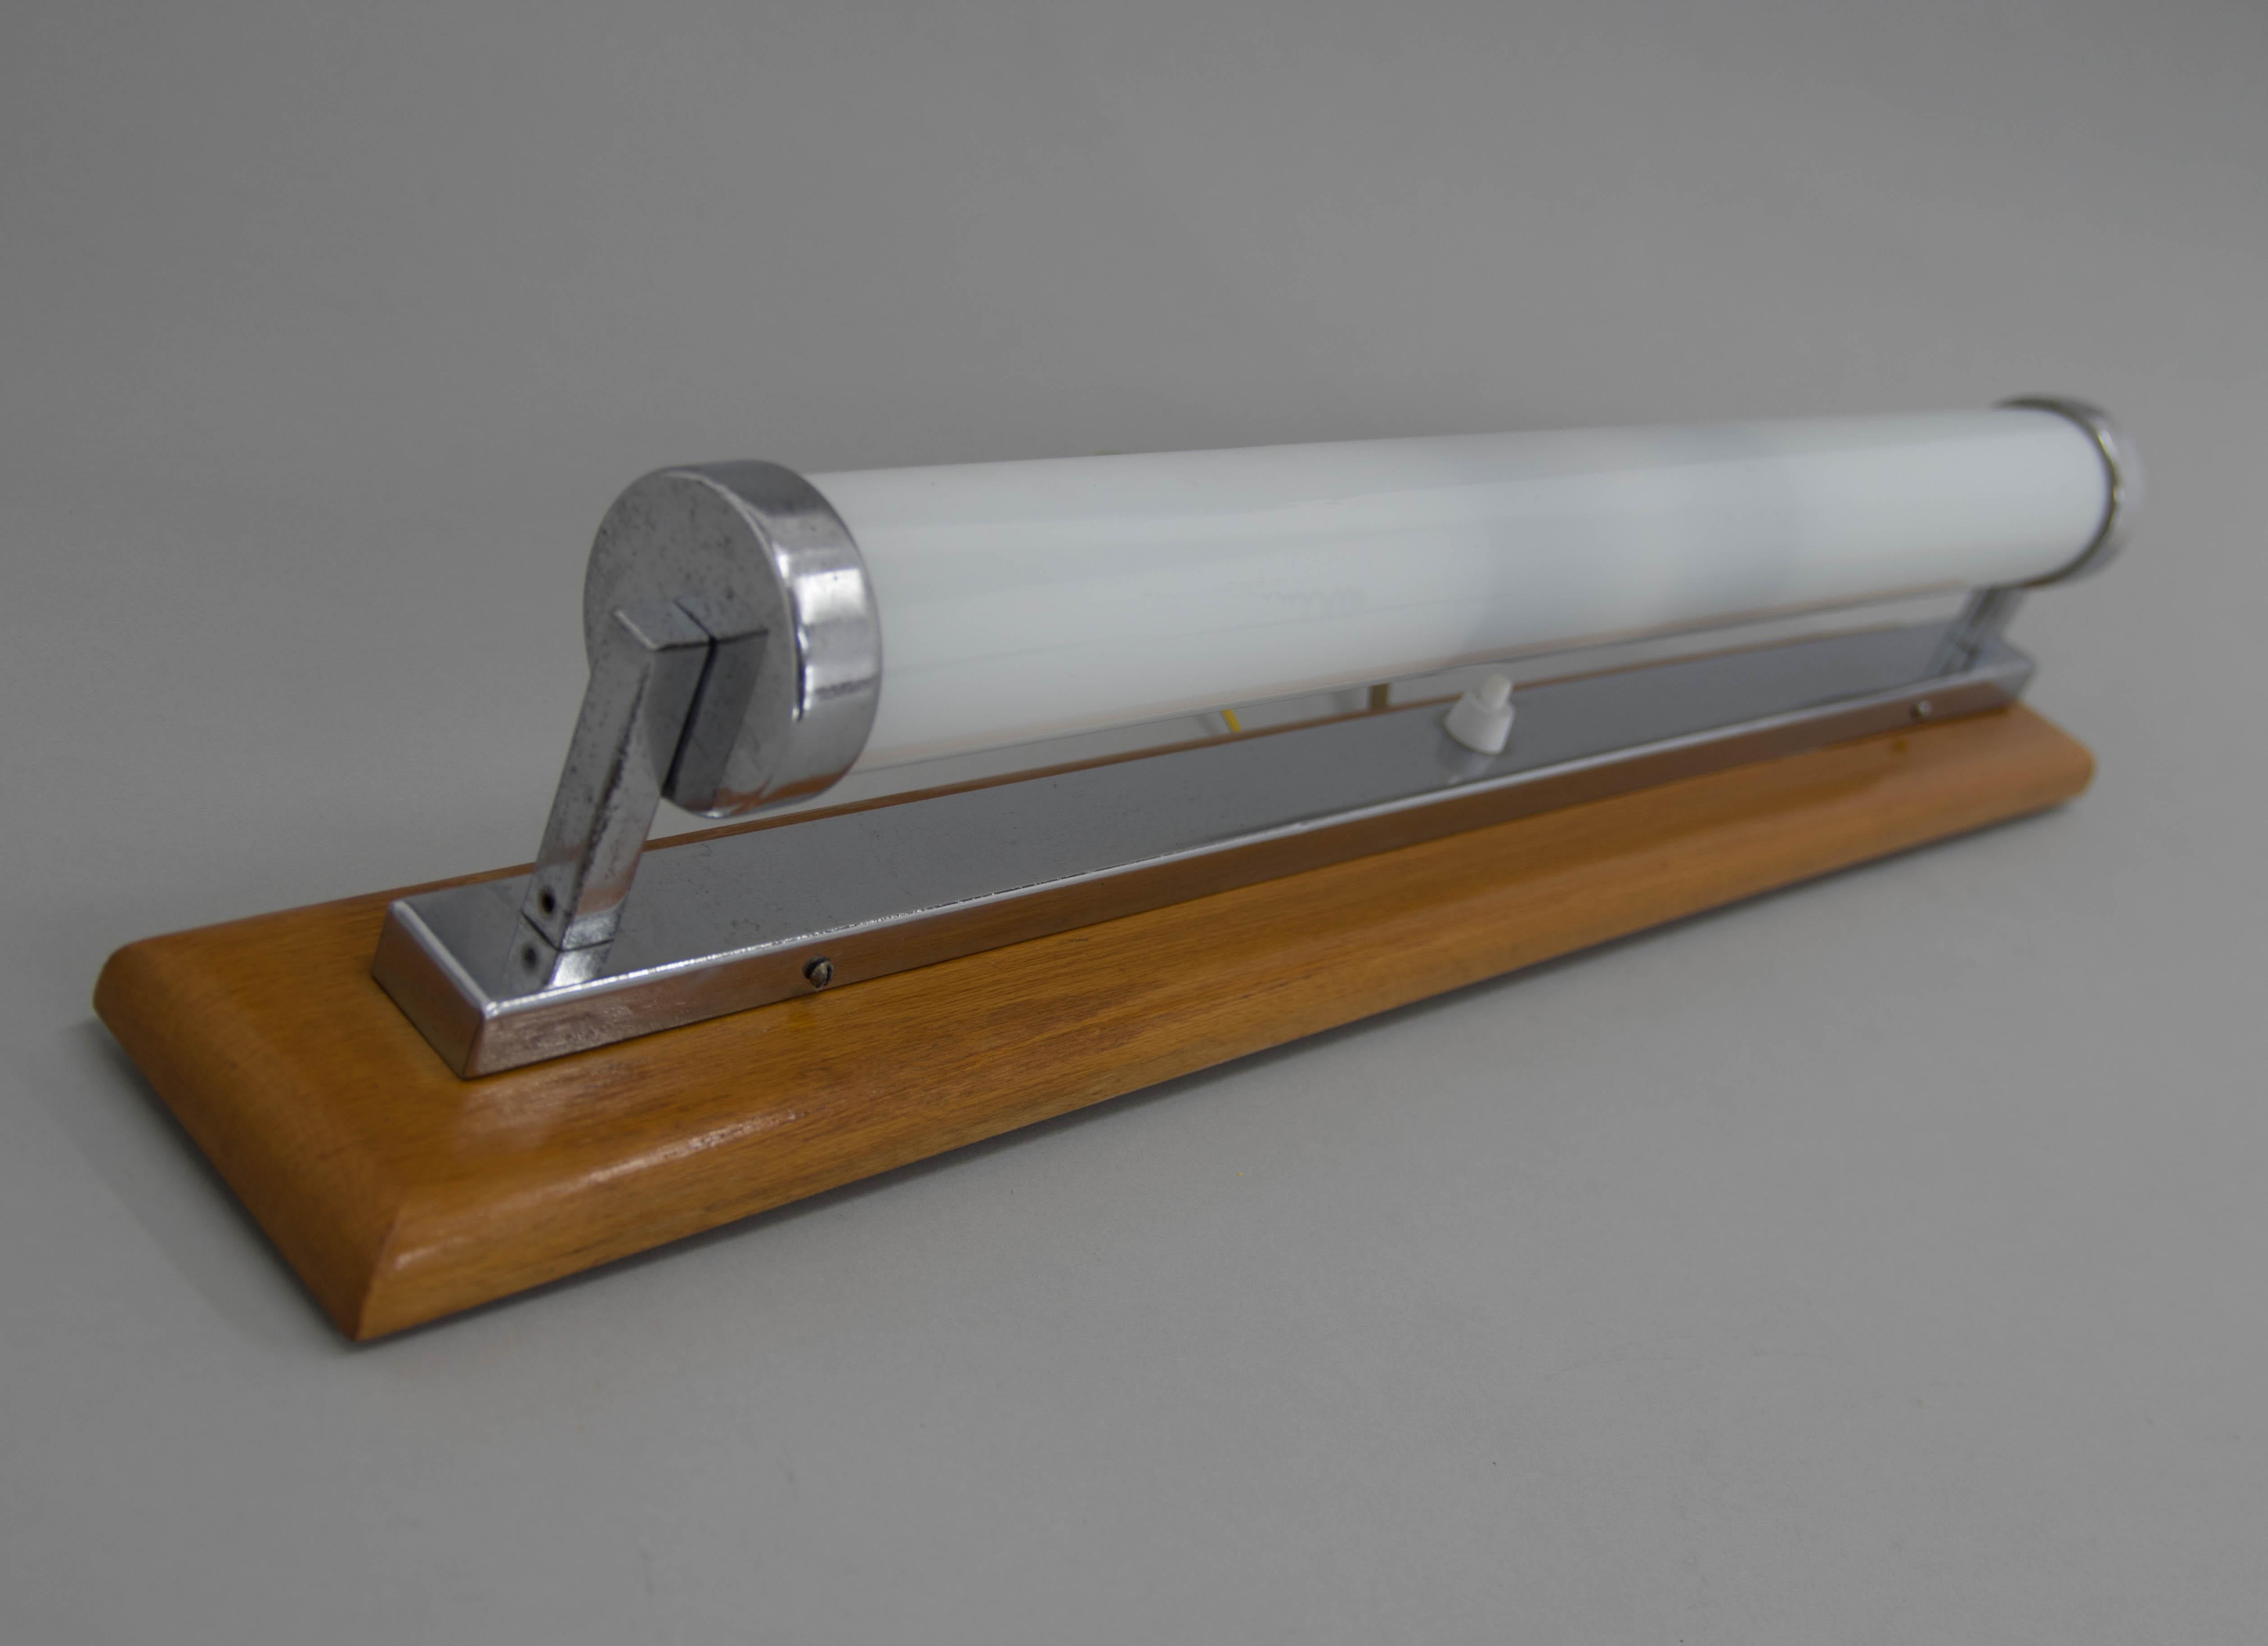 Long Bauhaus wall lamp with wooden base.
Chrome with minor age patina.
Restored: polished.
Rewired: 2x40W, E12-E14 bulbs
US wiring compatible.